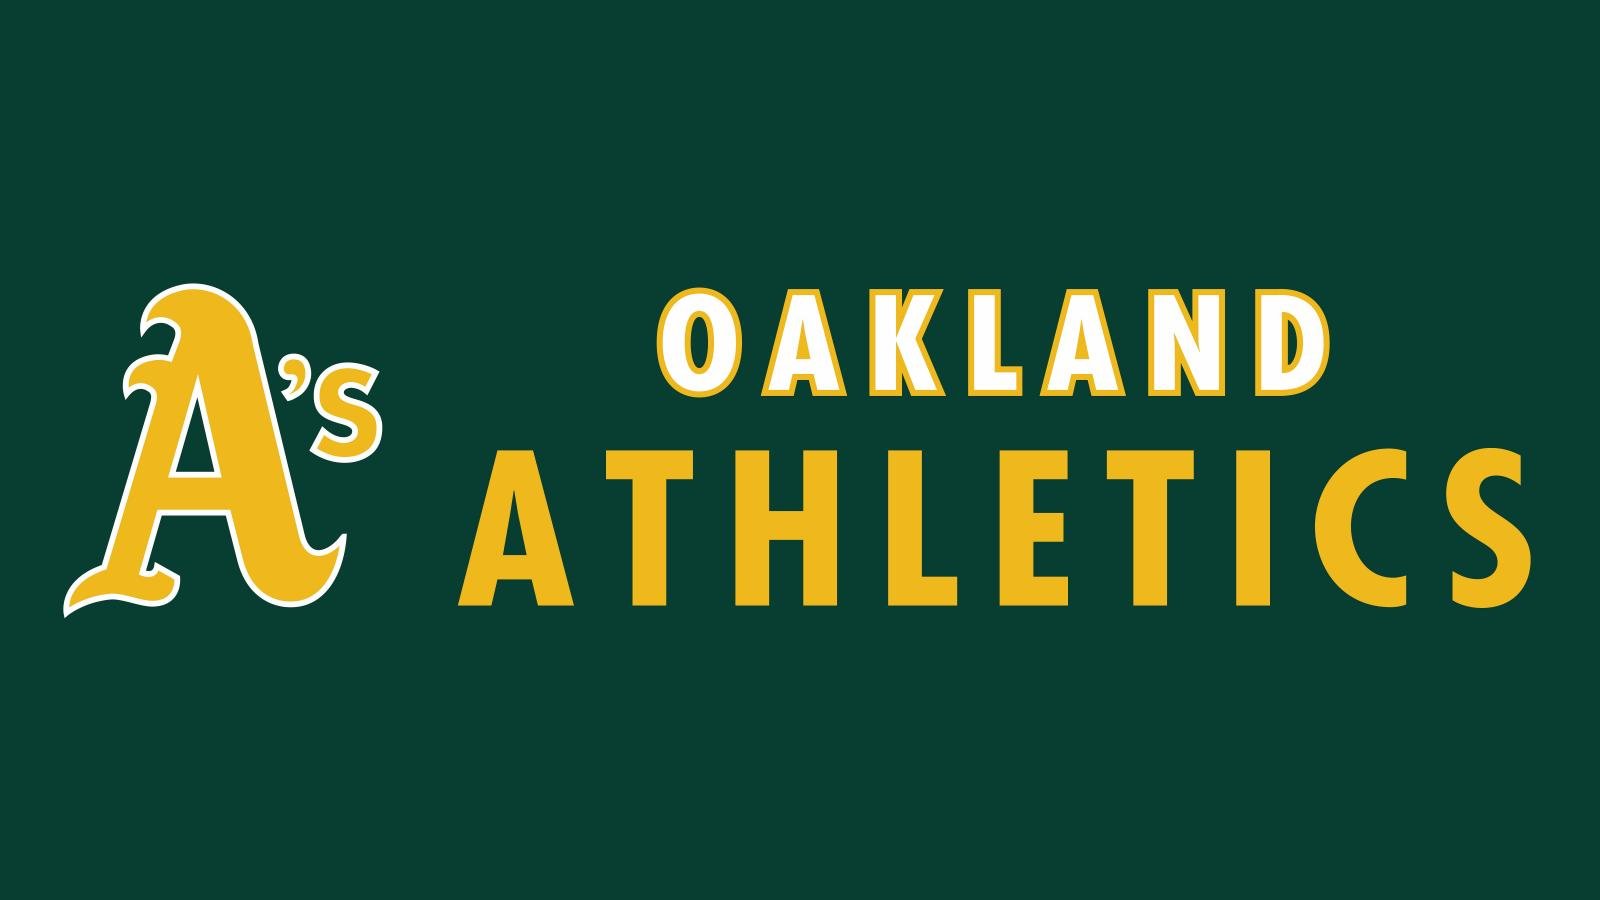 Download hd 1600x900 Oakland Athletics desktop background ID:310463 for free